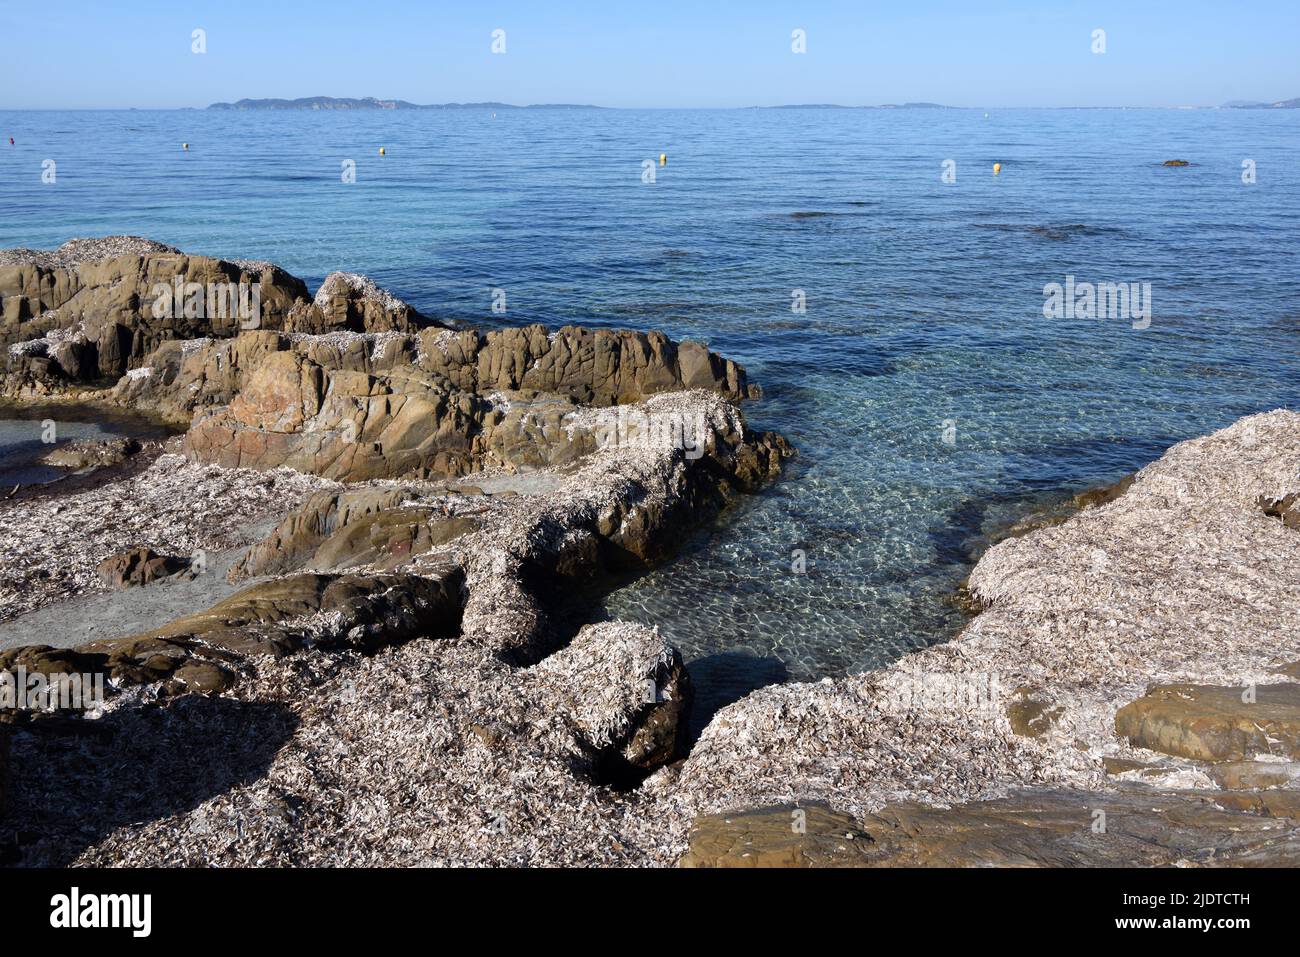 Rocky Seashore of Cabasson Beach covered in Dried Seagrass, or Posidonia Grass, Bormes-les-Mimosas Mediterranean Coast Côte-d'Azur Var France Stock Photo